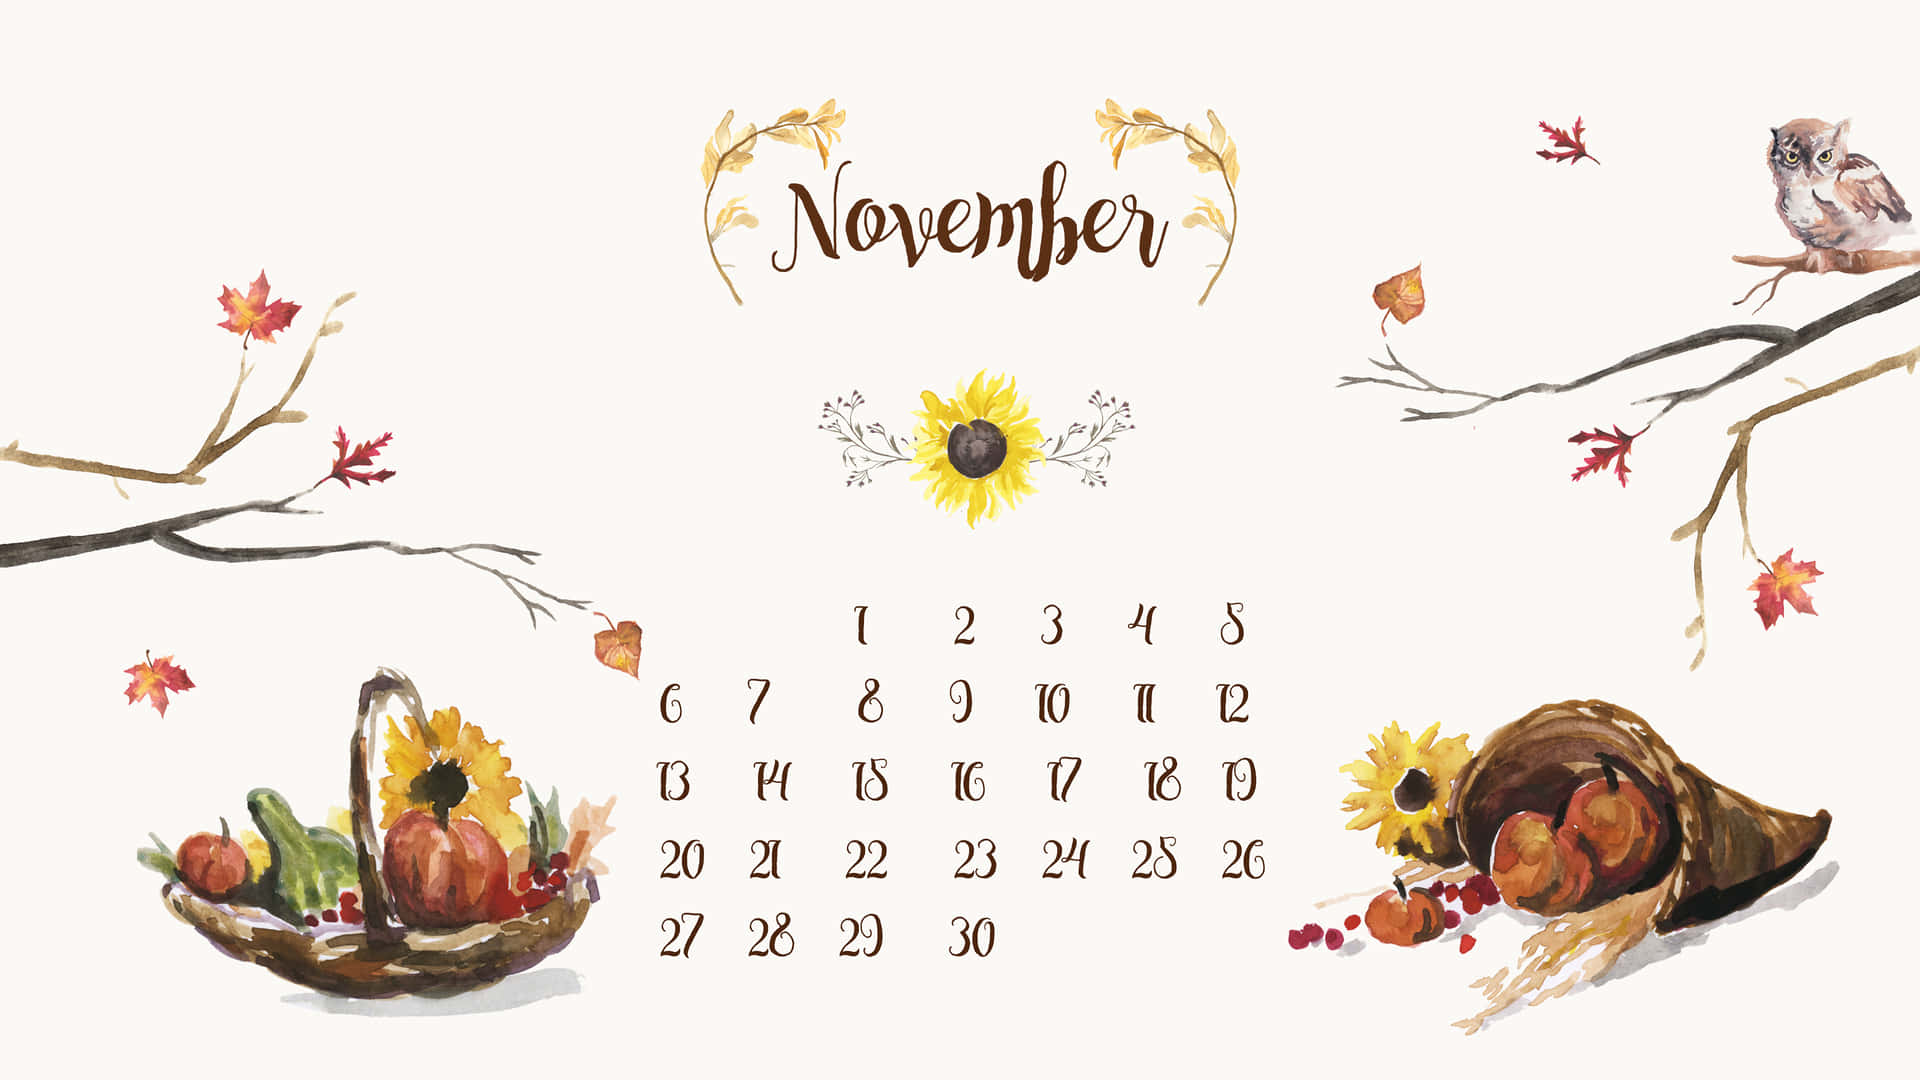 Download November Calendar Wallpaper With Sunflowers And Birds ...